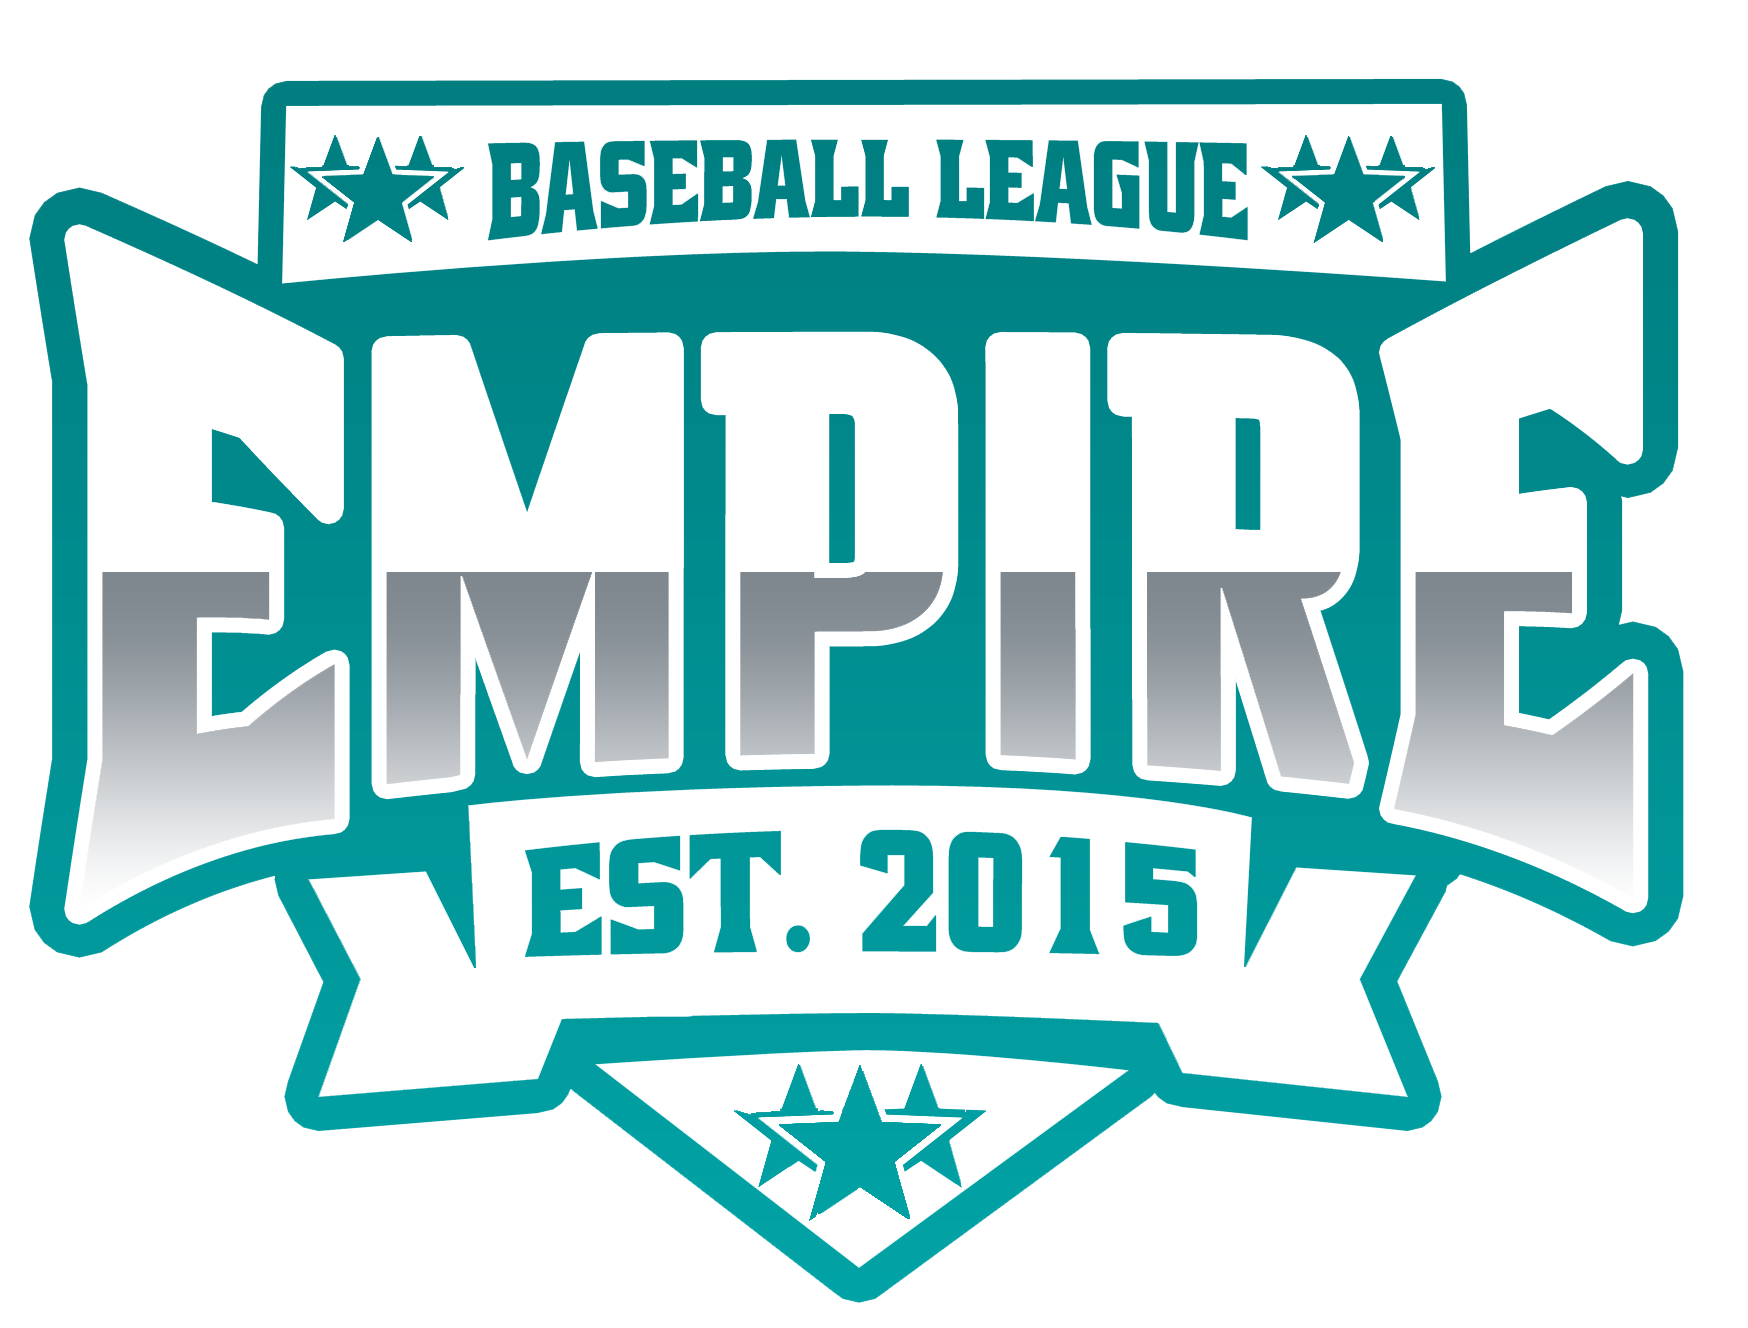 Welcome to the Empire Baseball League